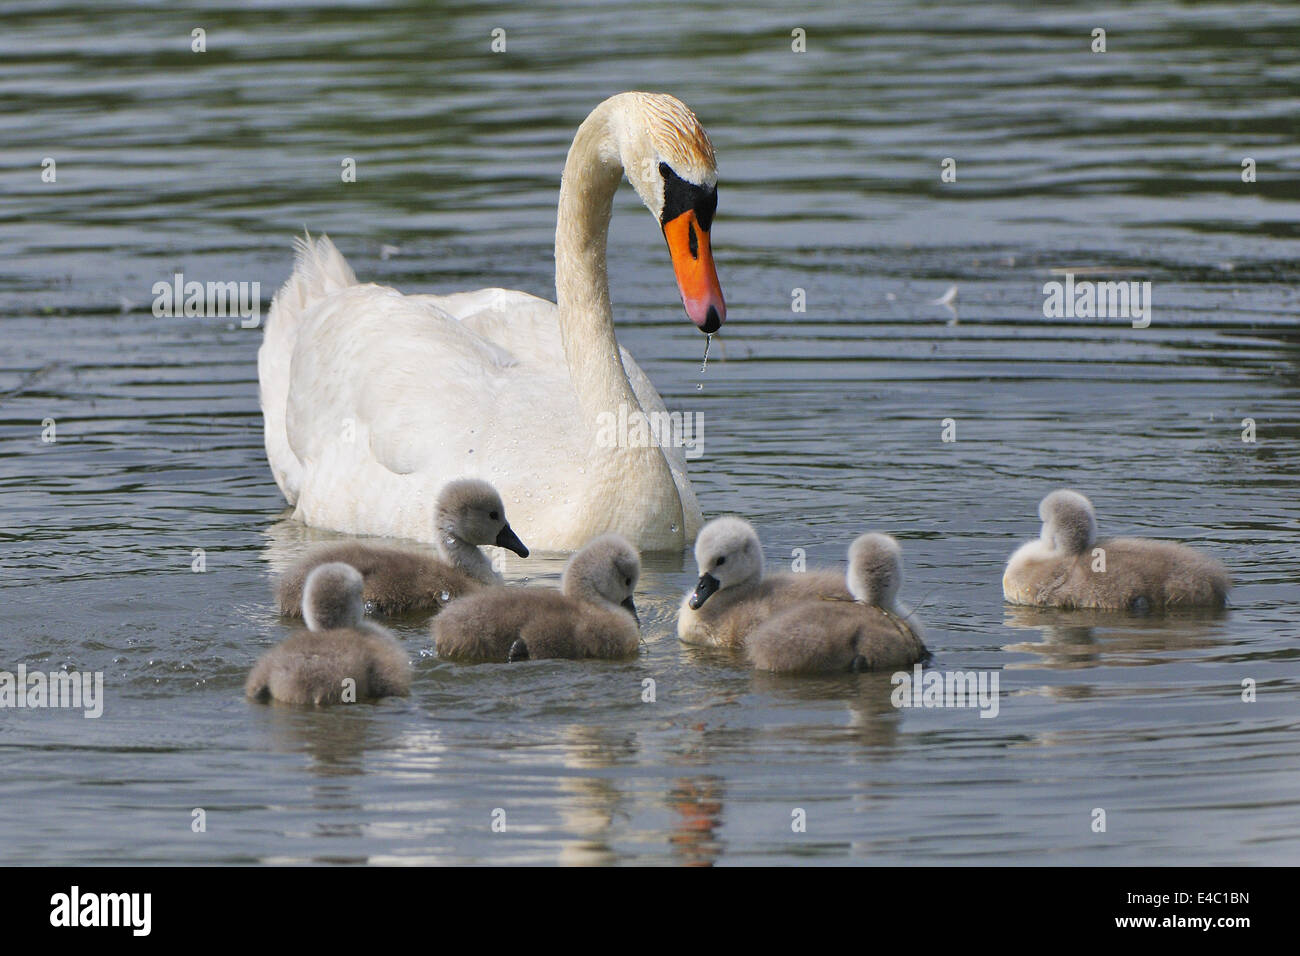 Mute swan with young animals Stock Photo